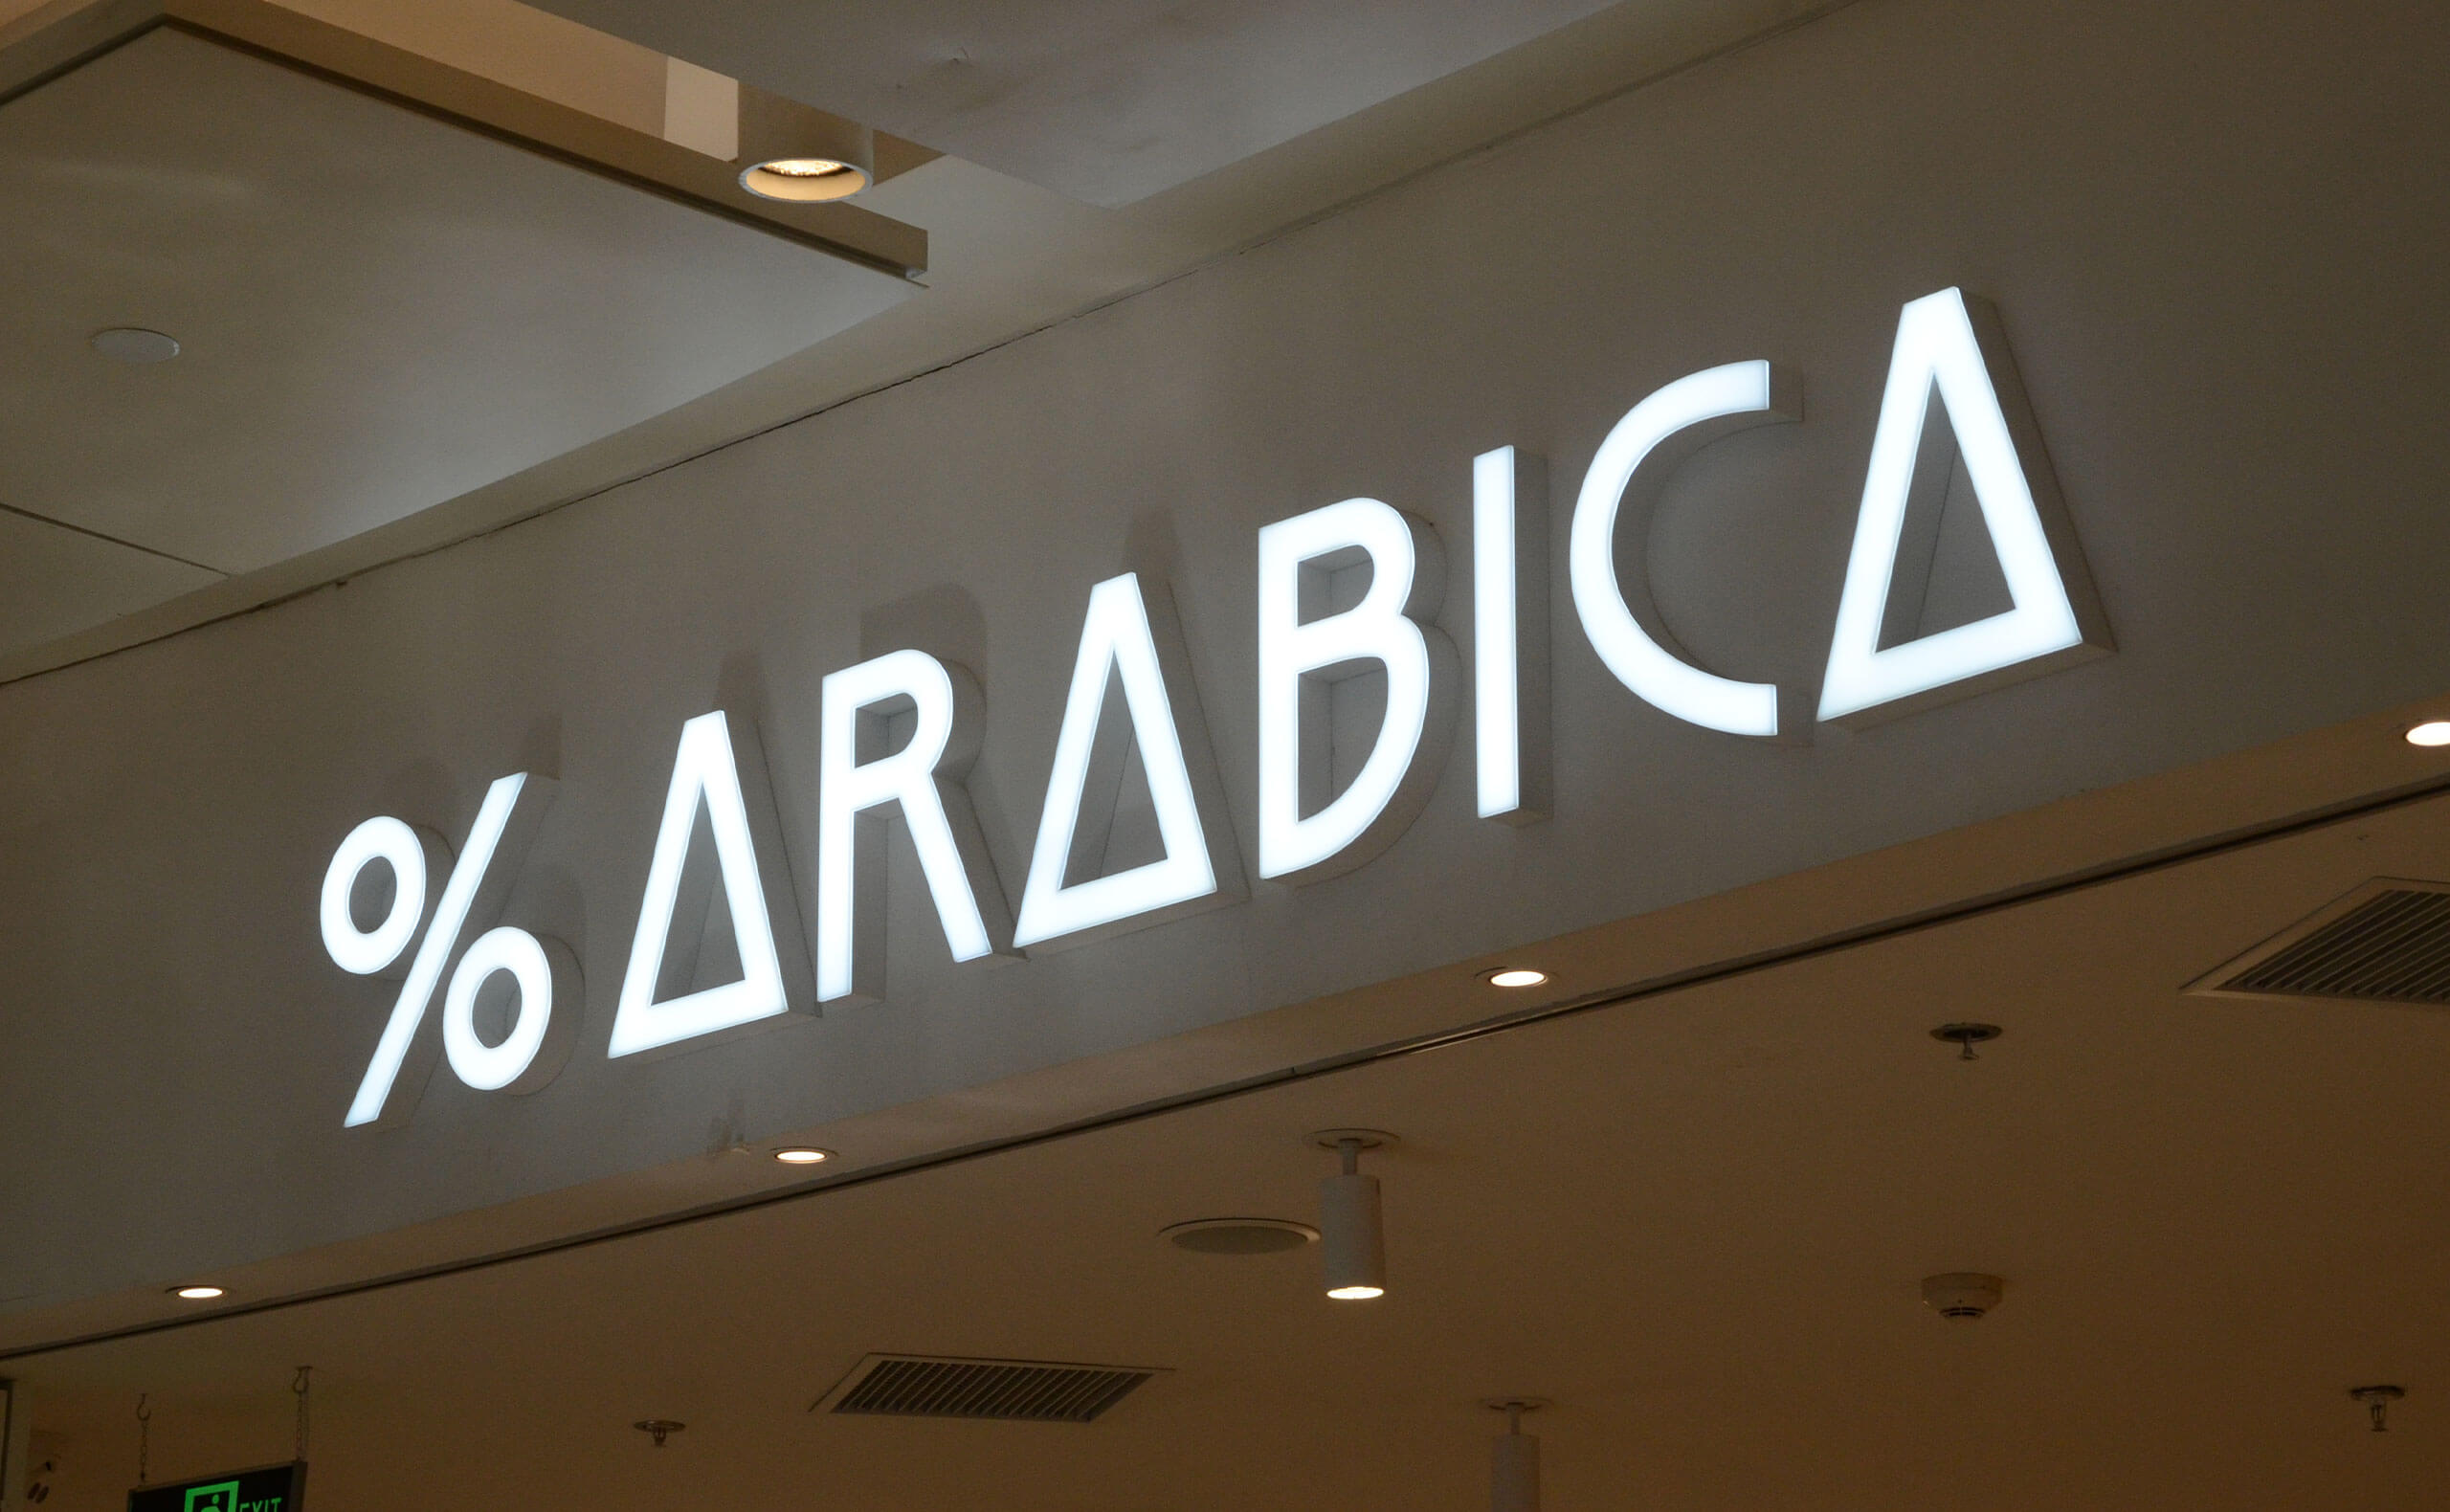 Metal Front Lit Trimless Channel Letters For Arabica